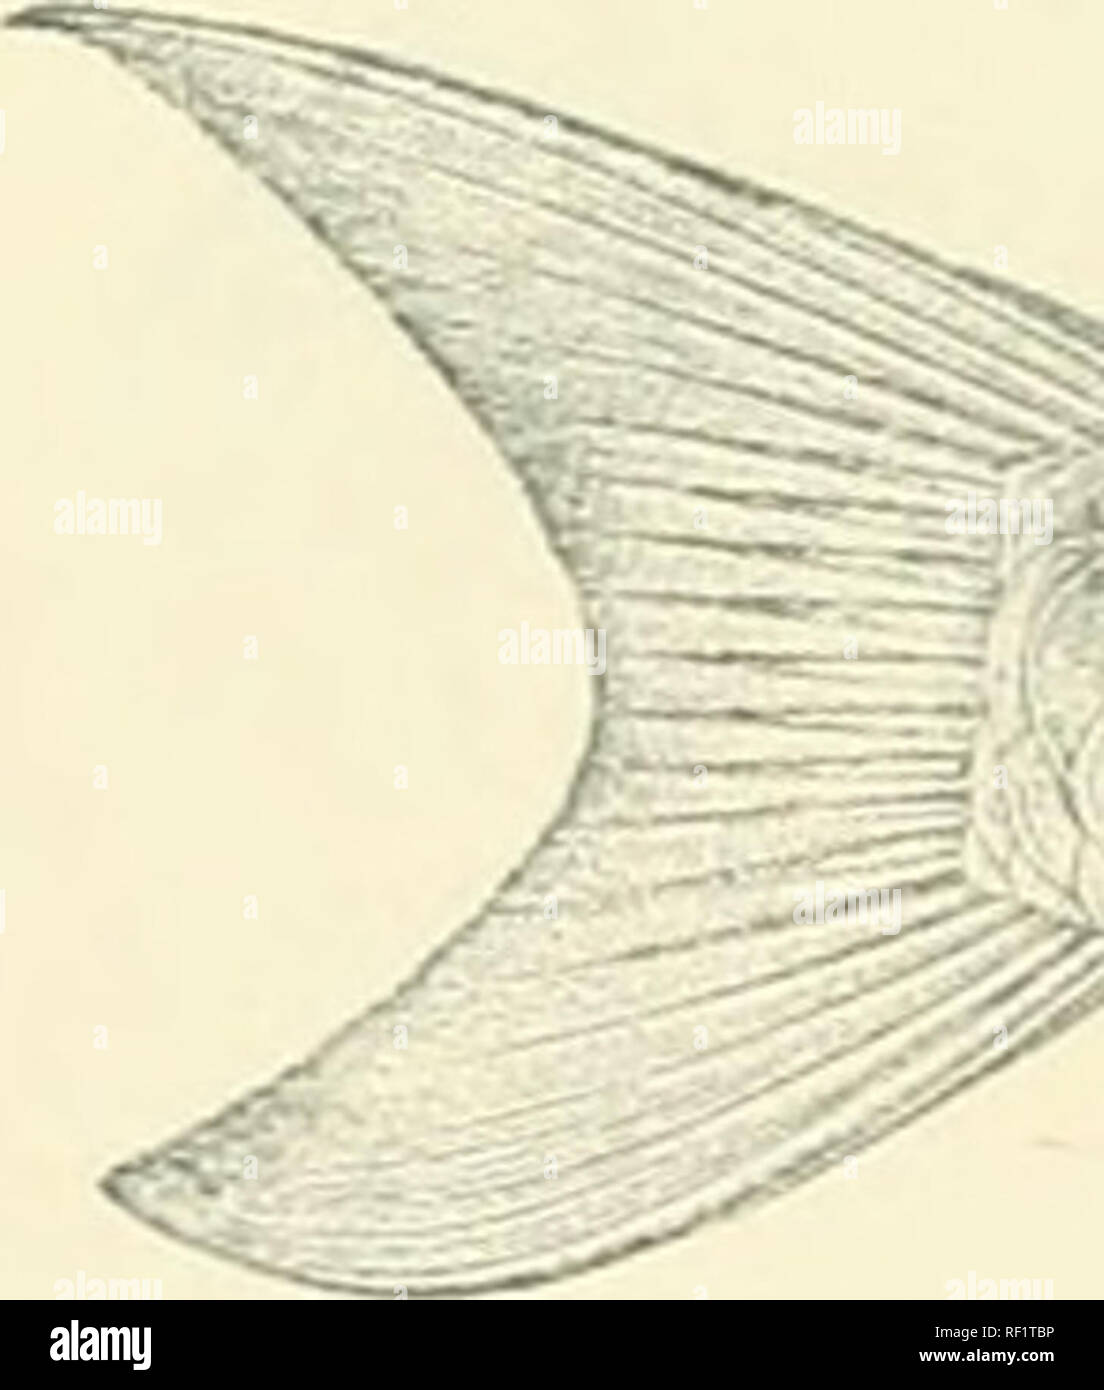 . Catalogue of the fresh-water fishes of Africa in the British Museum. Freshwater fishes. 234 ADDENDA, VOL. If. fiuely stiiutcd longitudinally, 28-32 ||, 2-U between lateral line and ventral, 12 round caudal peduncle. Olive-brown above, whitish beneath ; scales on upper half of body with a dark basal spot; fins greyish brown. Total length o-jO millim. Chiloango System. 1-3. Types. Lonn^o TJ. ;it N'Kutn. ])r. AV. ,). Ansorge (C). 4-5. Types. Luali R. at Buco Ziiu. Distinguished from the preceding l)y the narrower head, the more developed lips, tlie longer caudal peduncle, and the greater number Stock Photo